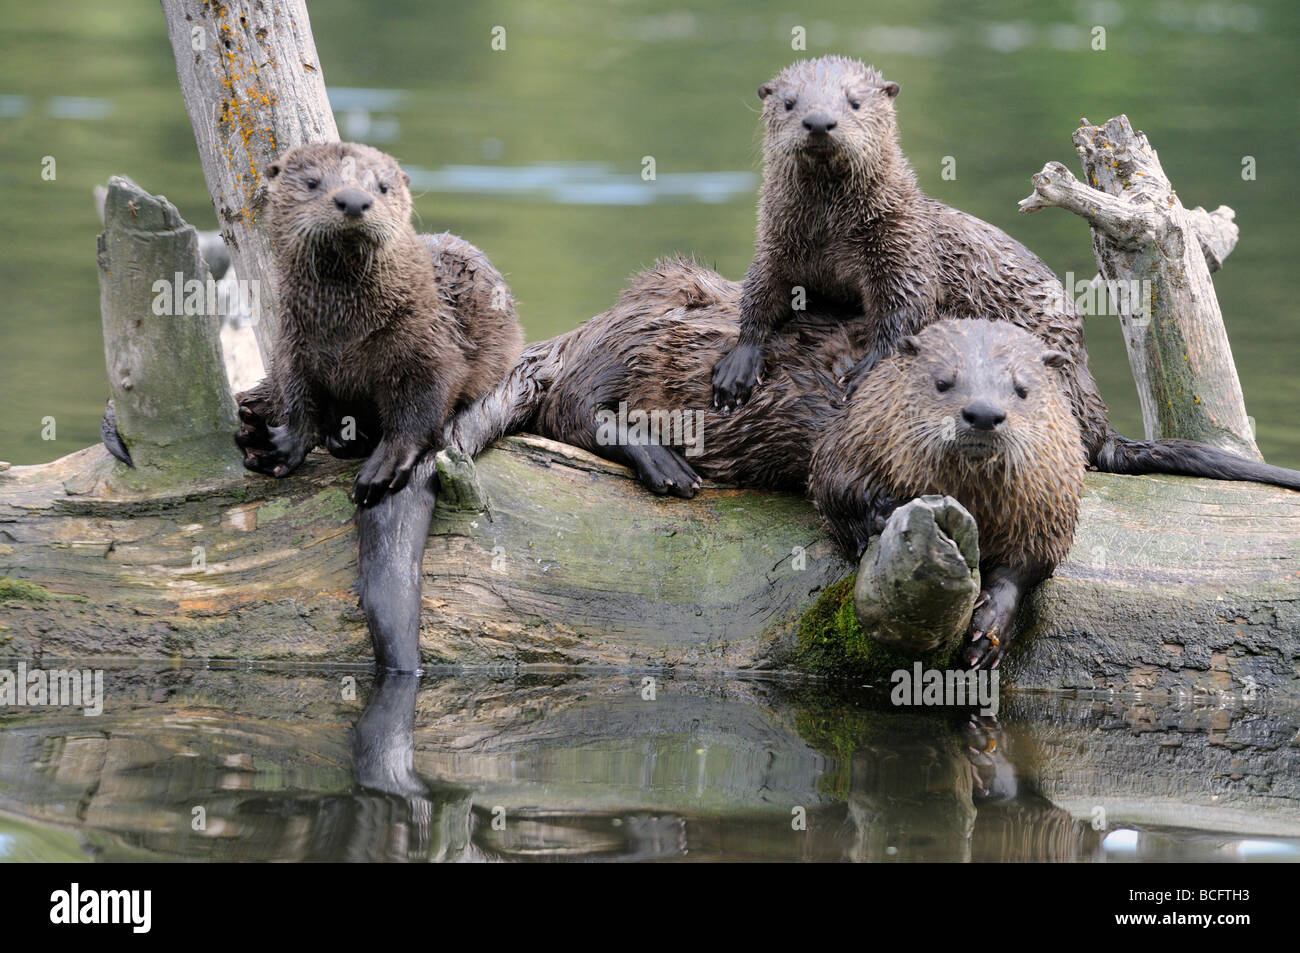 Stock photo of a river otter family sitting together on a log, Yellowstone National Park, 2009. Stock Photo